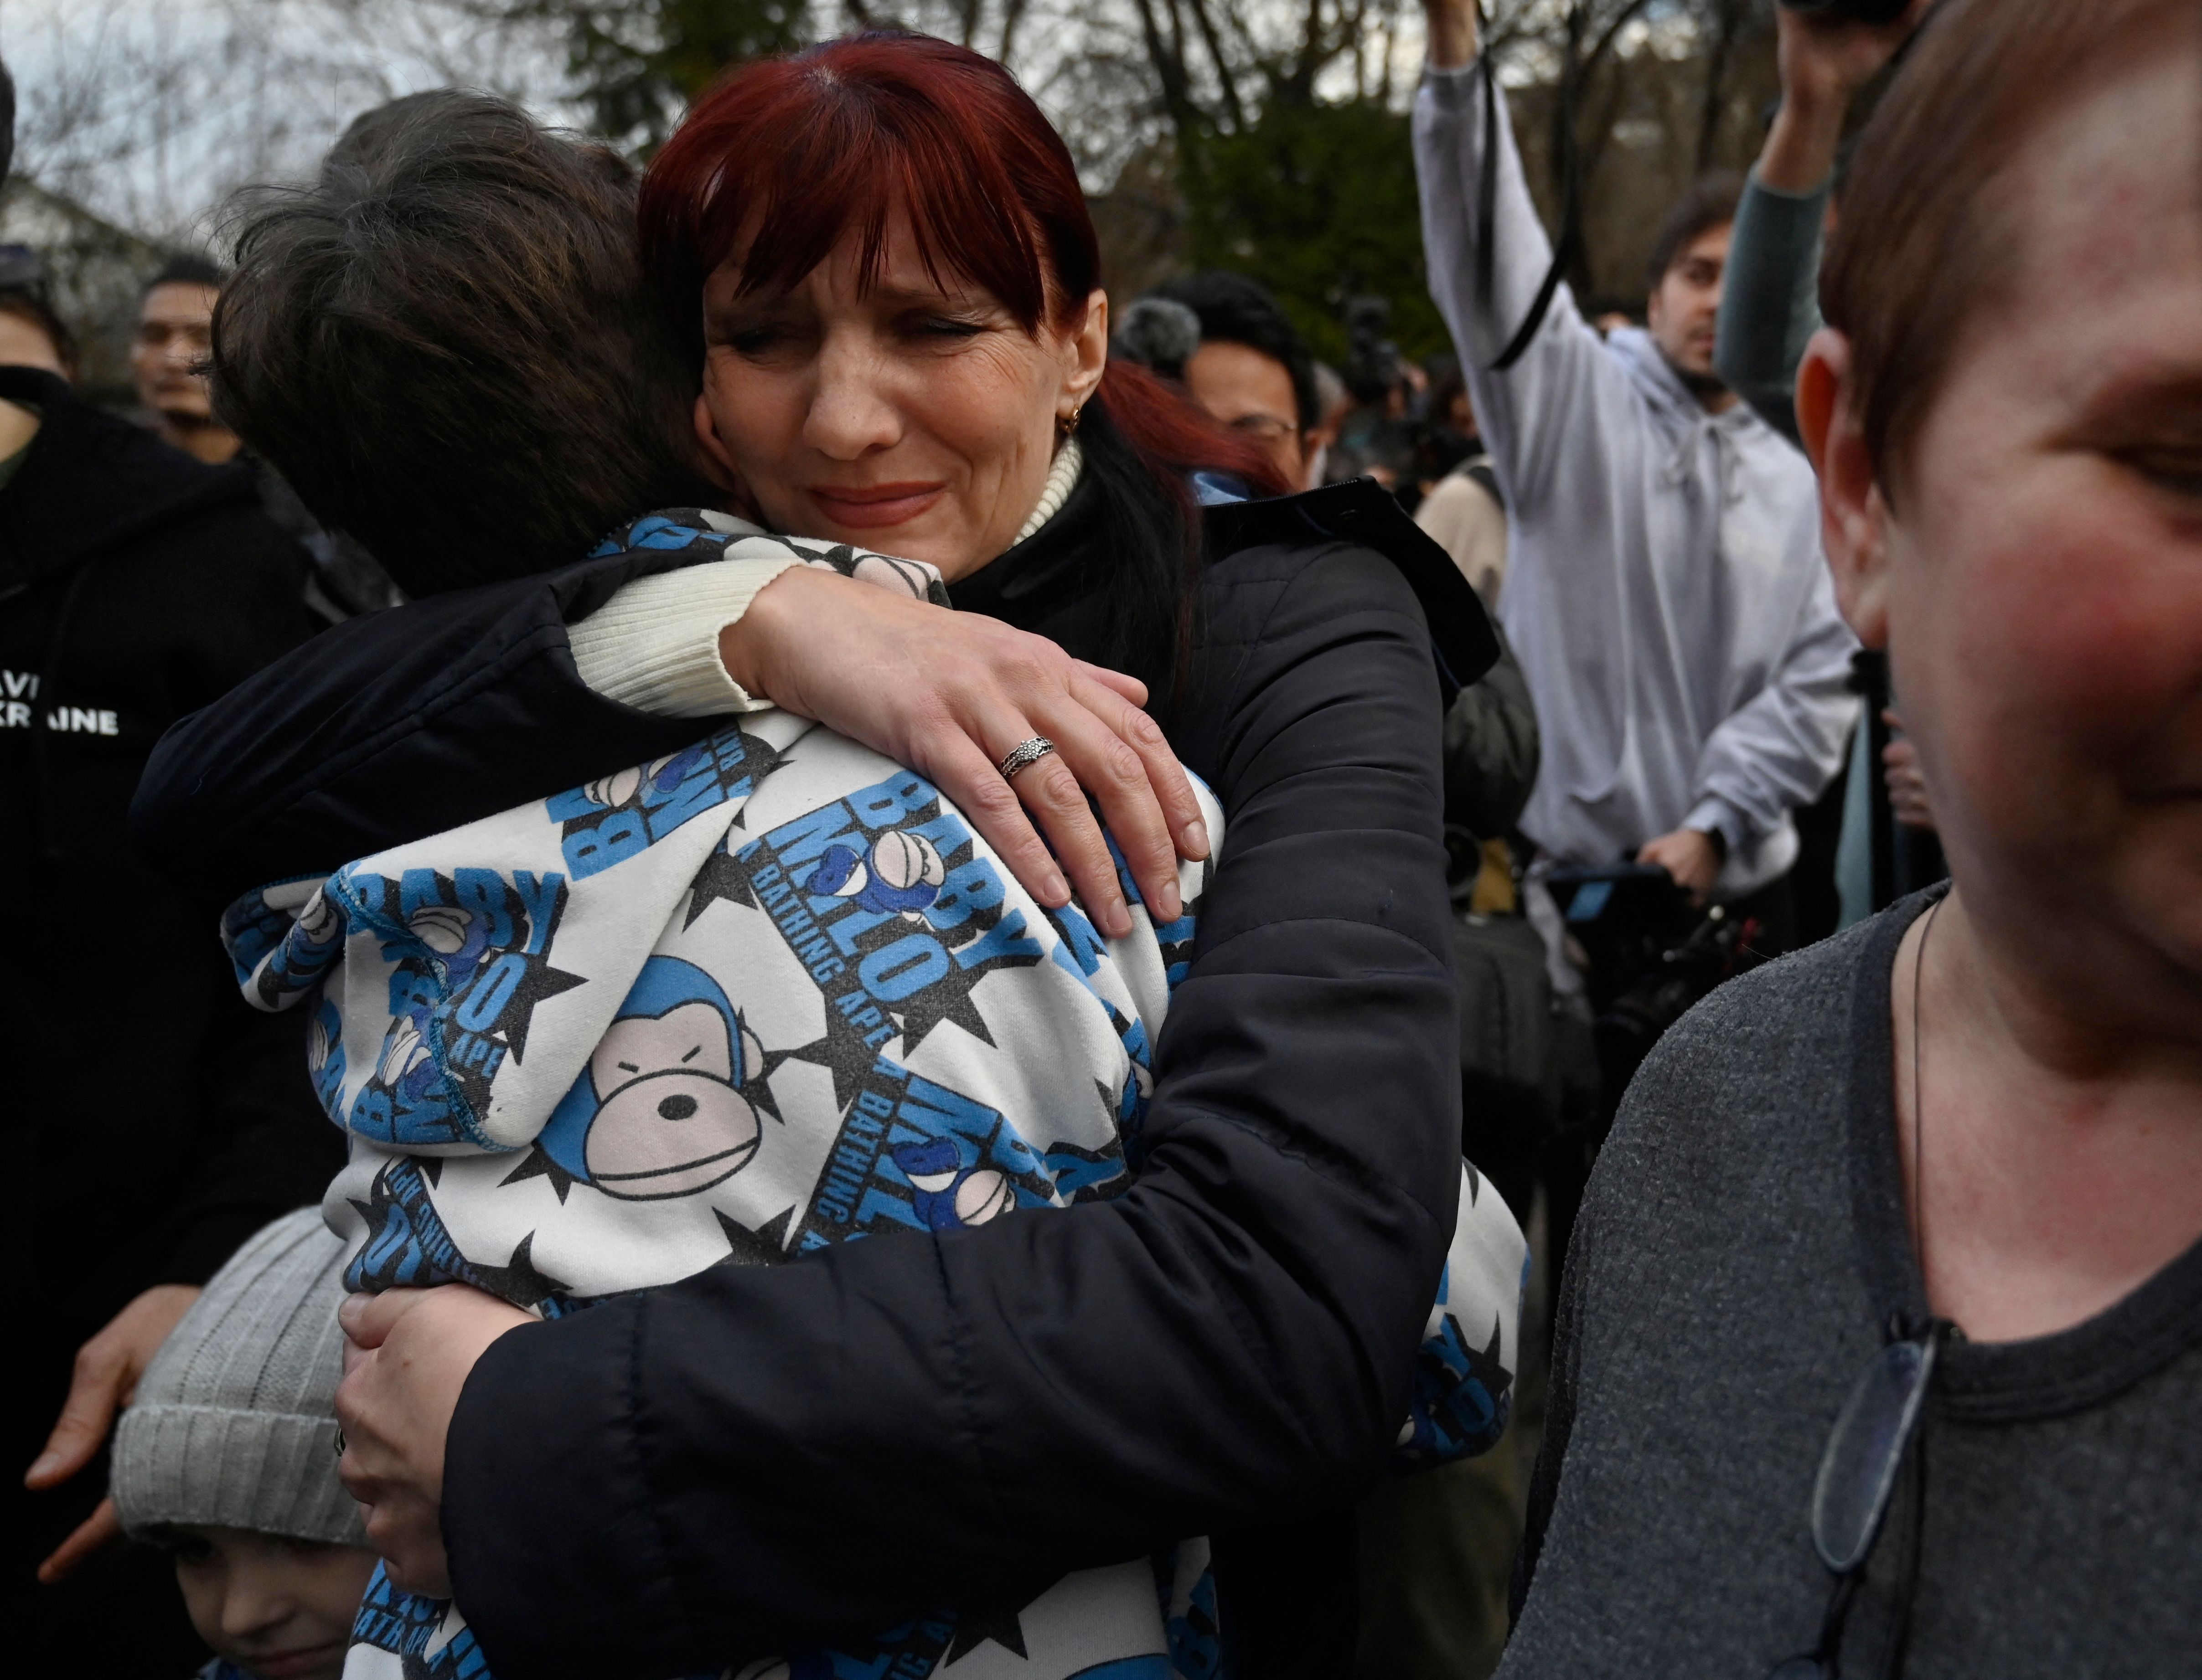 Inessa hugs her son Vitaly after the bus delivering him and more than a dozen other children back from Russian-held territory arrived in Kyiv on March 22, 2023. Photo: SERGEI CHUZAVKOV / AFP via Getty Images